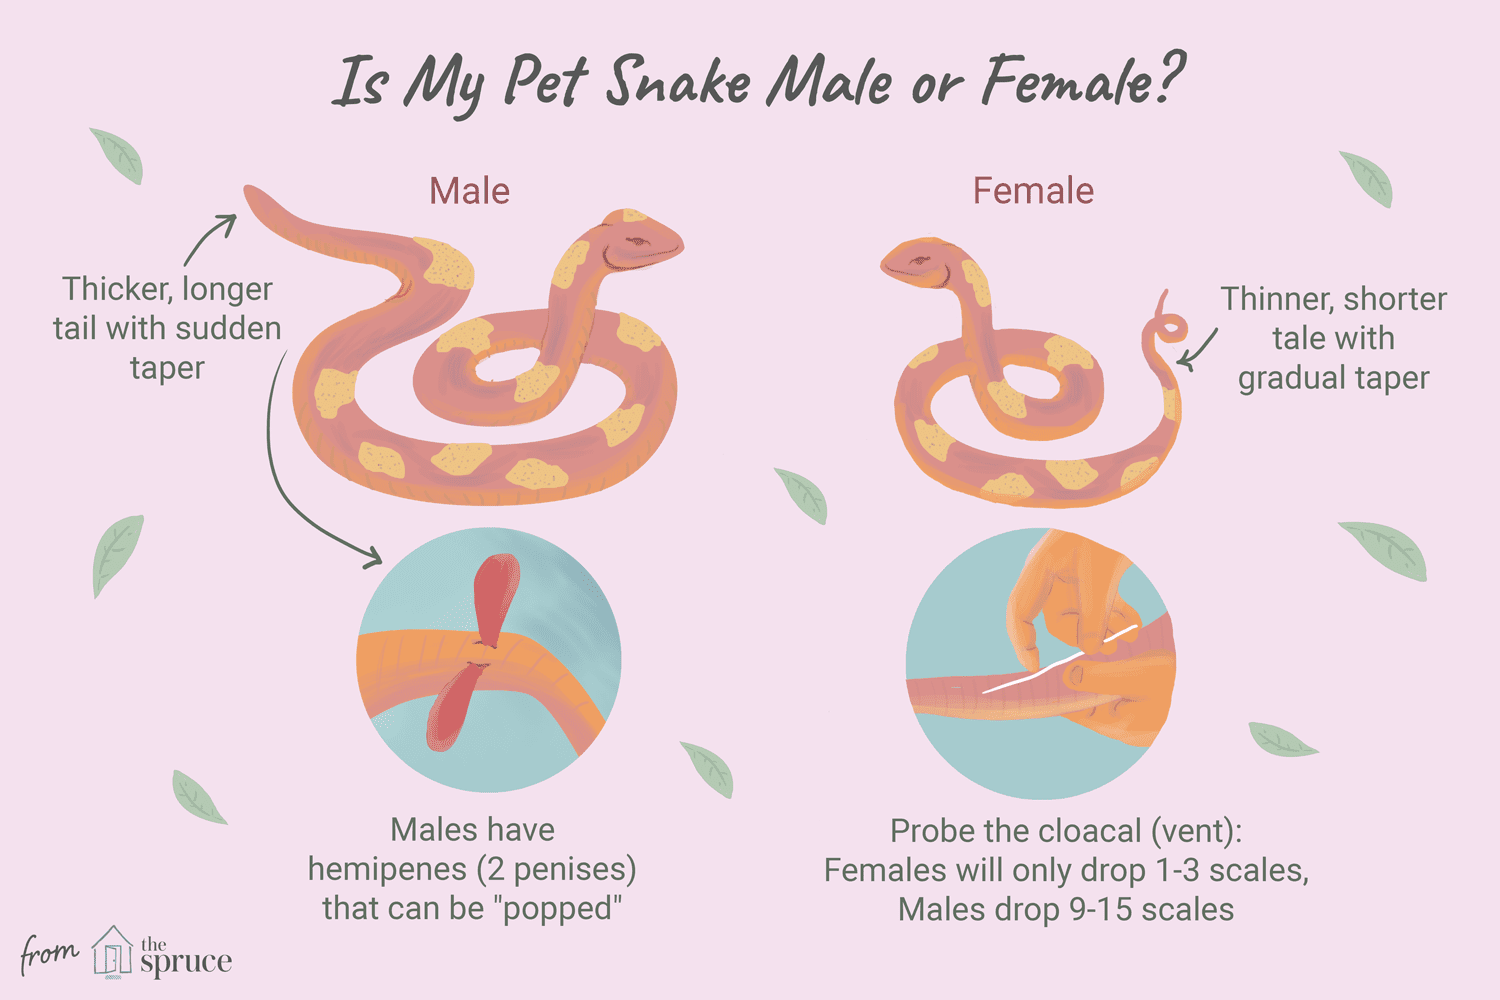 How to Tell if a Rattlesnake is Male or Female?